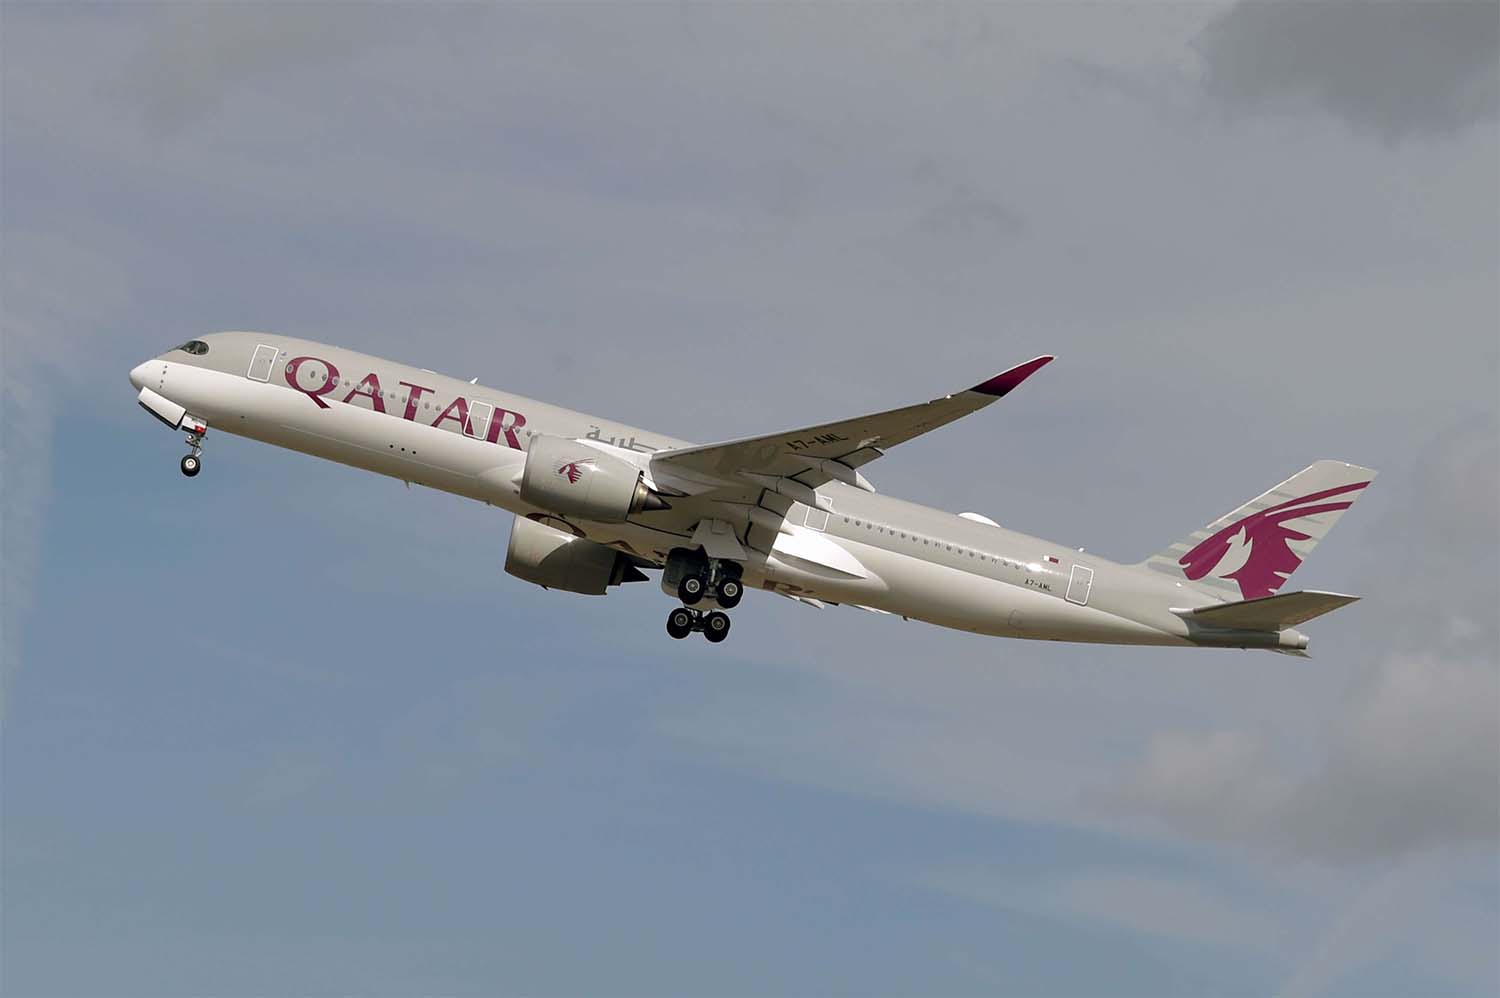 Australia said Qatar Airways flight to Sydney was only one of 10 flights subjected to the searches